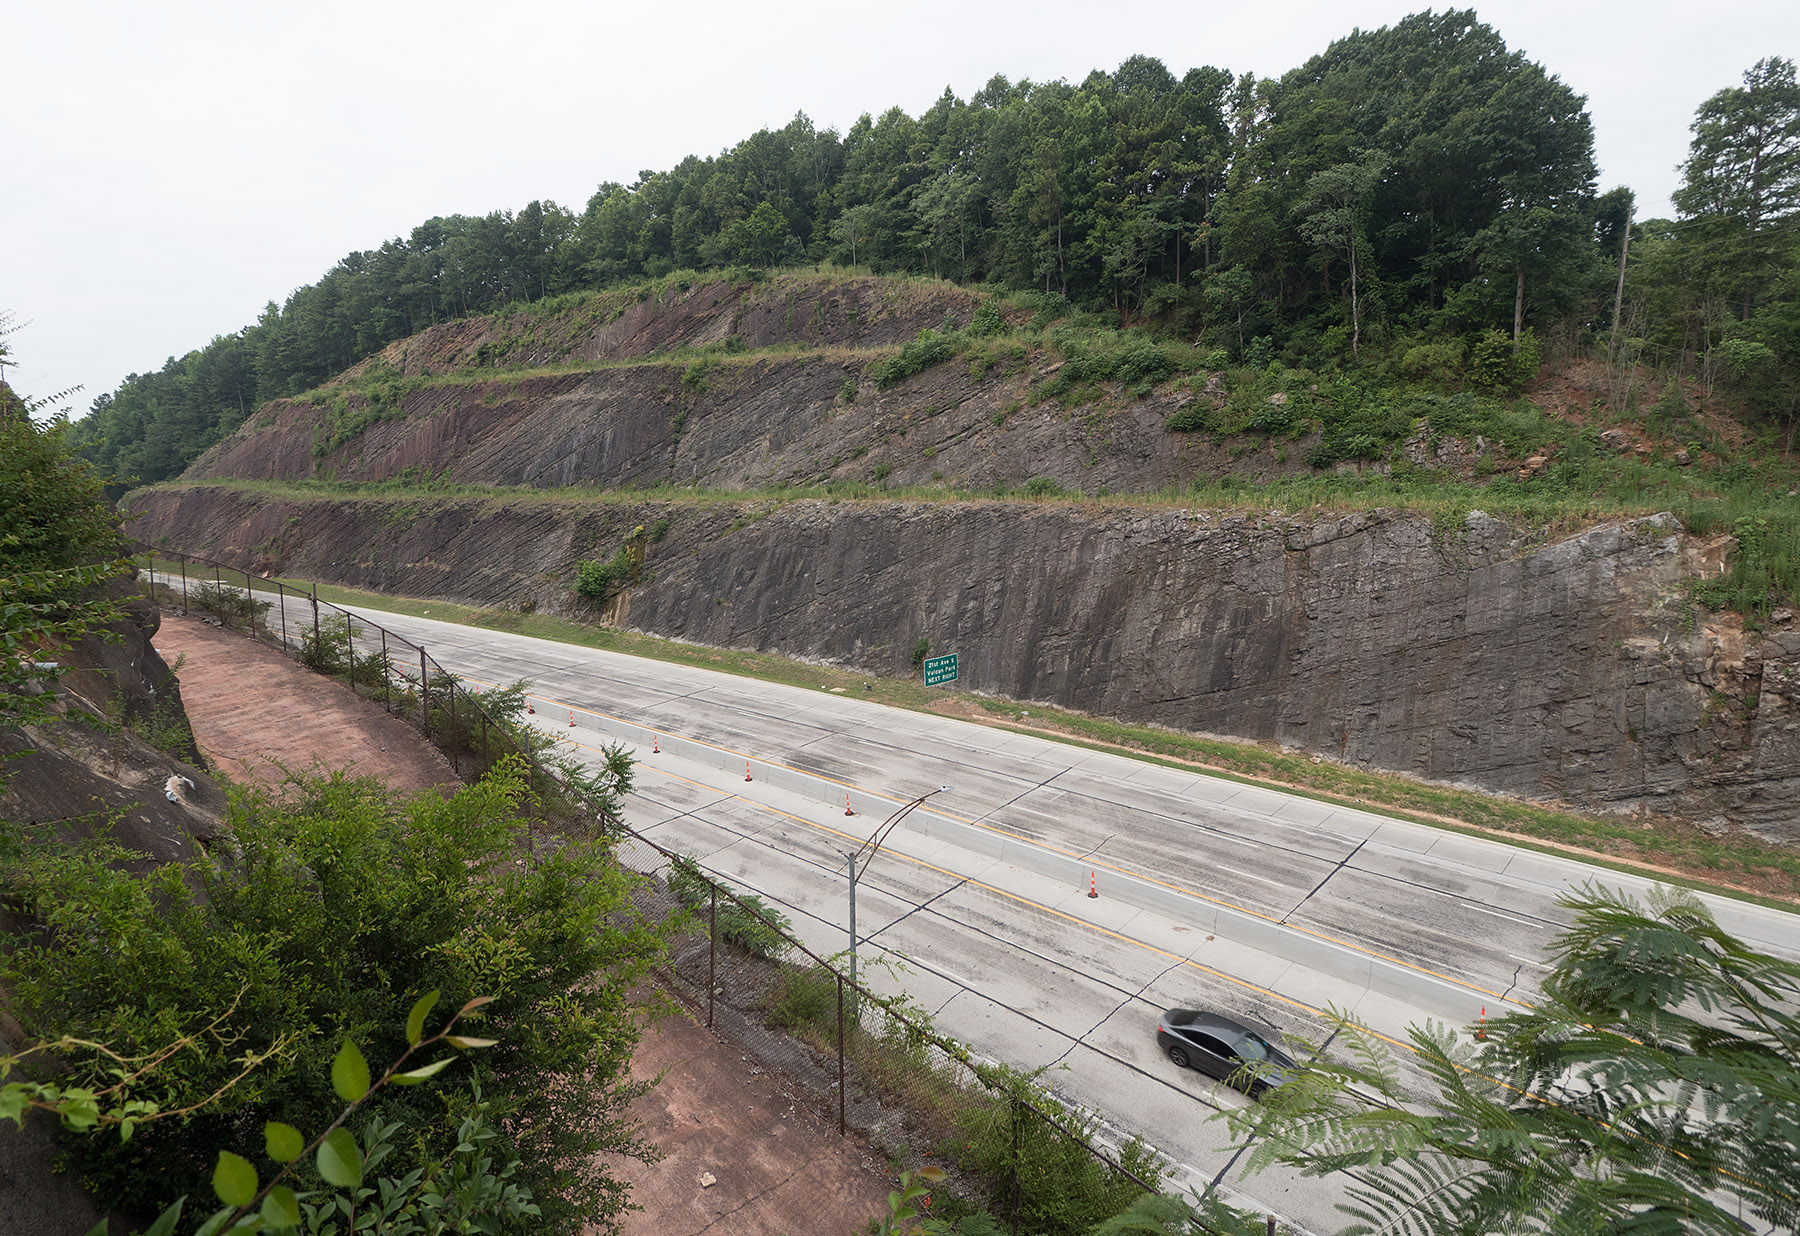 This is the Red Mountain Expressway road cut for US Highway 31 and 280 in Birmingham, Alabama which reveals the stratigraphy of weathered sedimentary layers laid down from 485 to 420 million years ago and folded and tilted into an anticline.  The geology of the road cut is described in detail in:  Lancefield, J.  Lost Worlds in Alabama Rocks.  A Guide to the State’s Ancient Life and Landscapes.  2nd Ed, The Alabama Museum of Natural History, 2018.